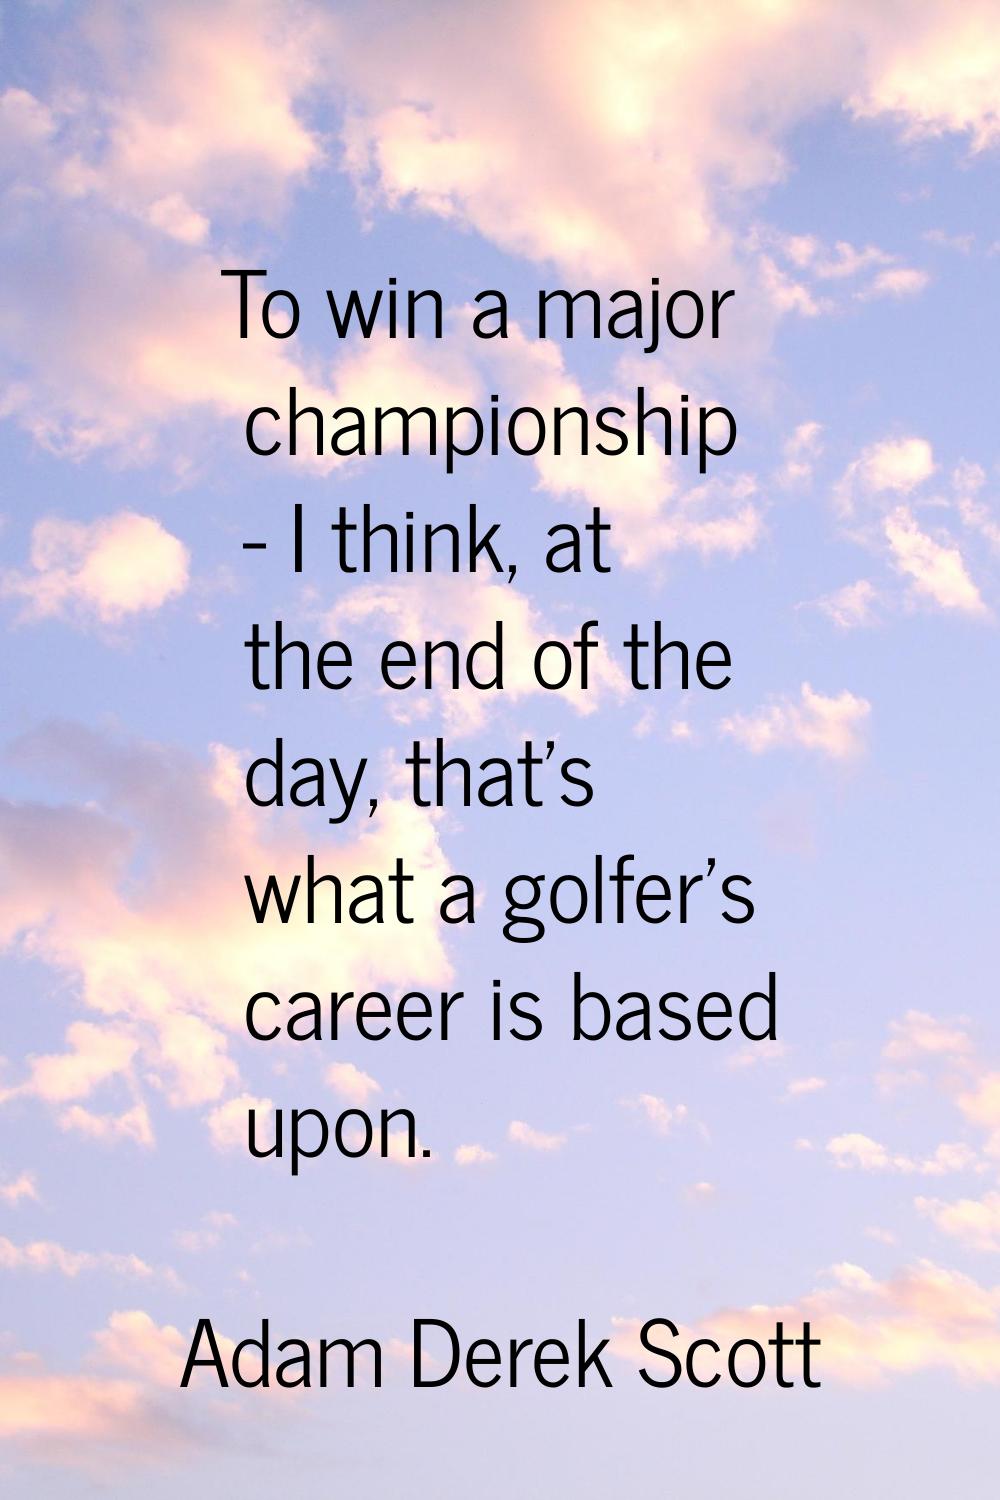 To win a major championship - I think, at the end of the day, that's what a golfer's career is base